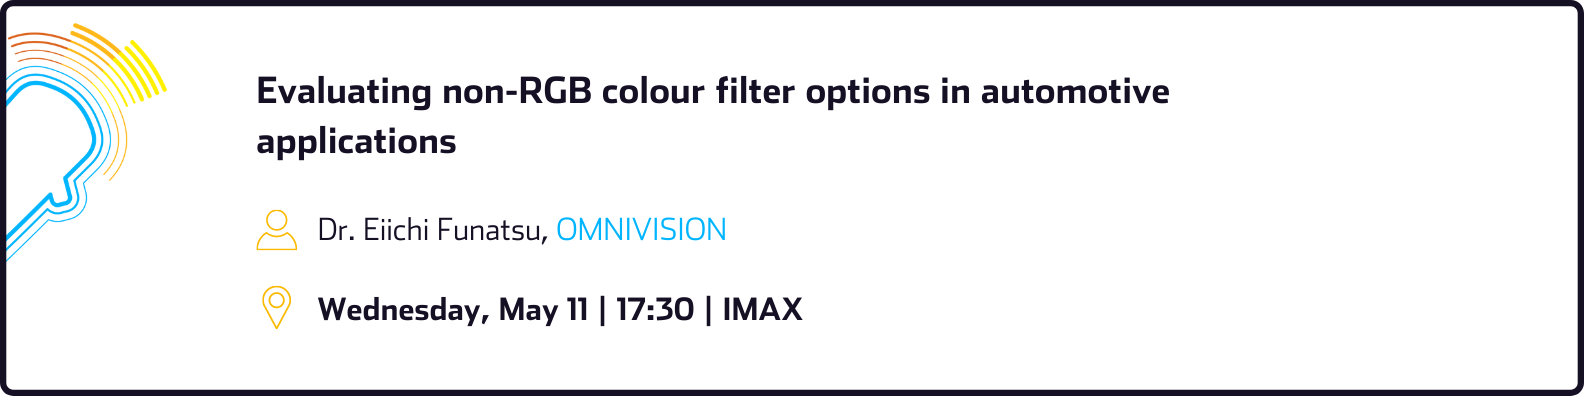 non RGB colour filter options in automotive applications banner